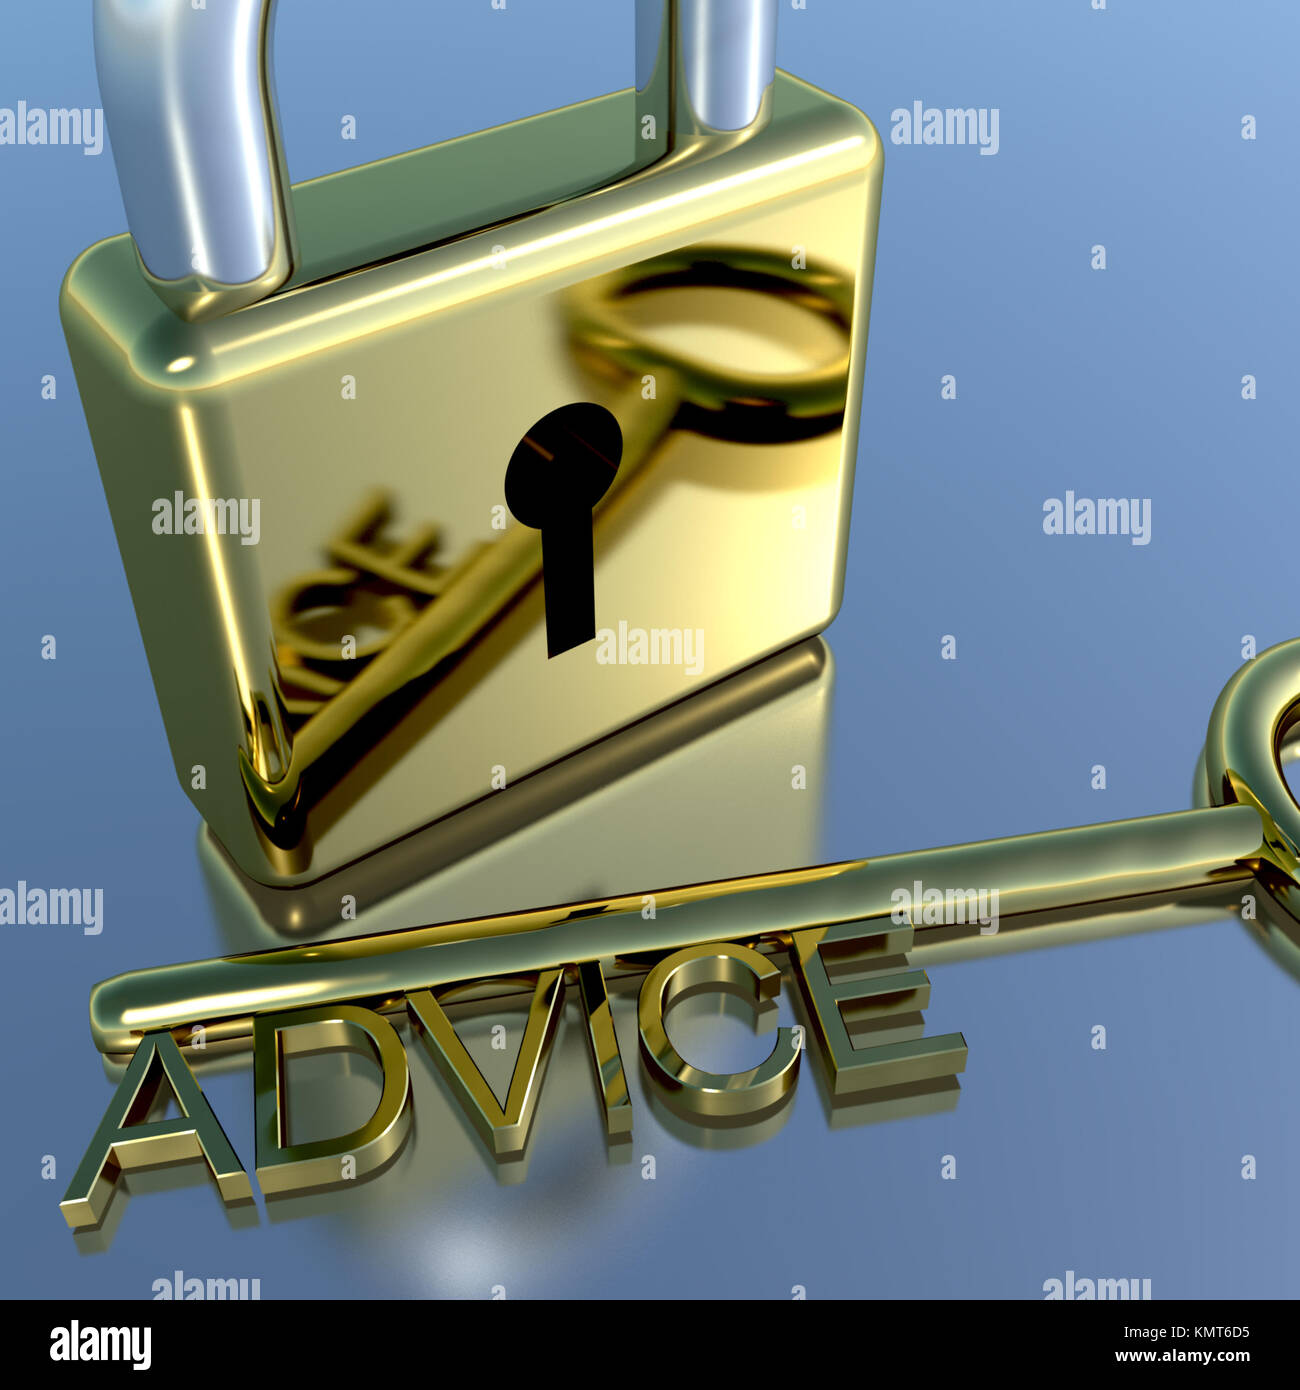 Padlock With Advice Key Showing Support Help Or Information Stock Photo